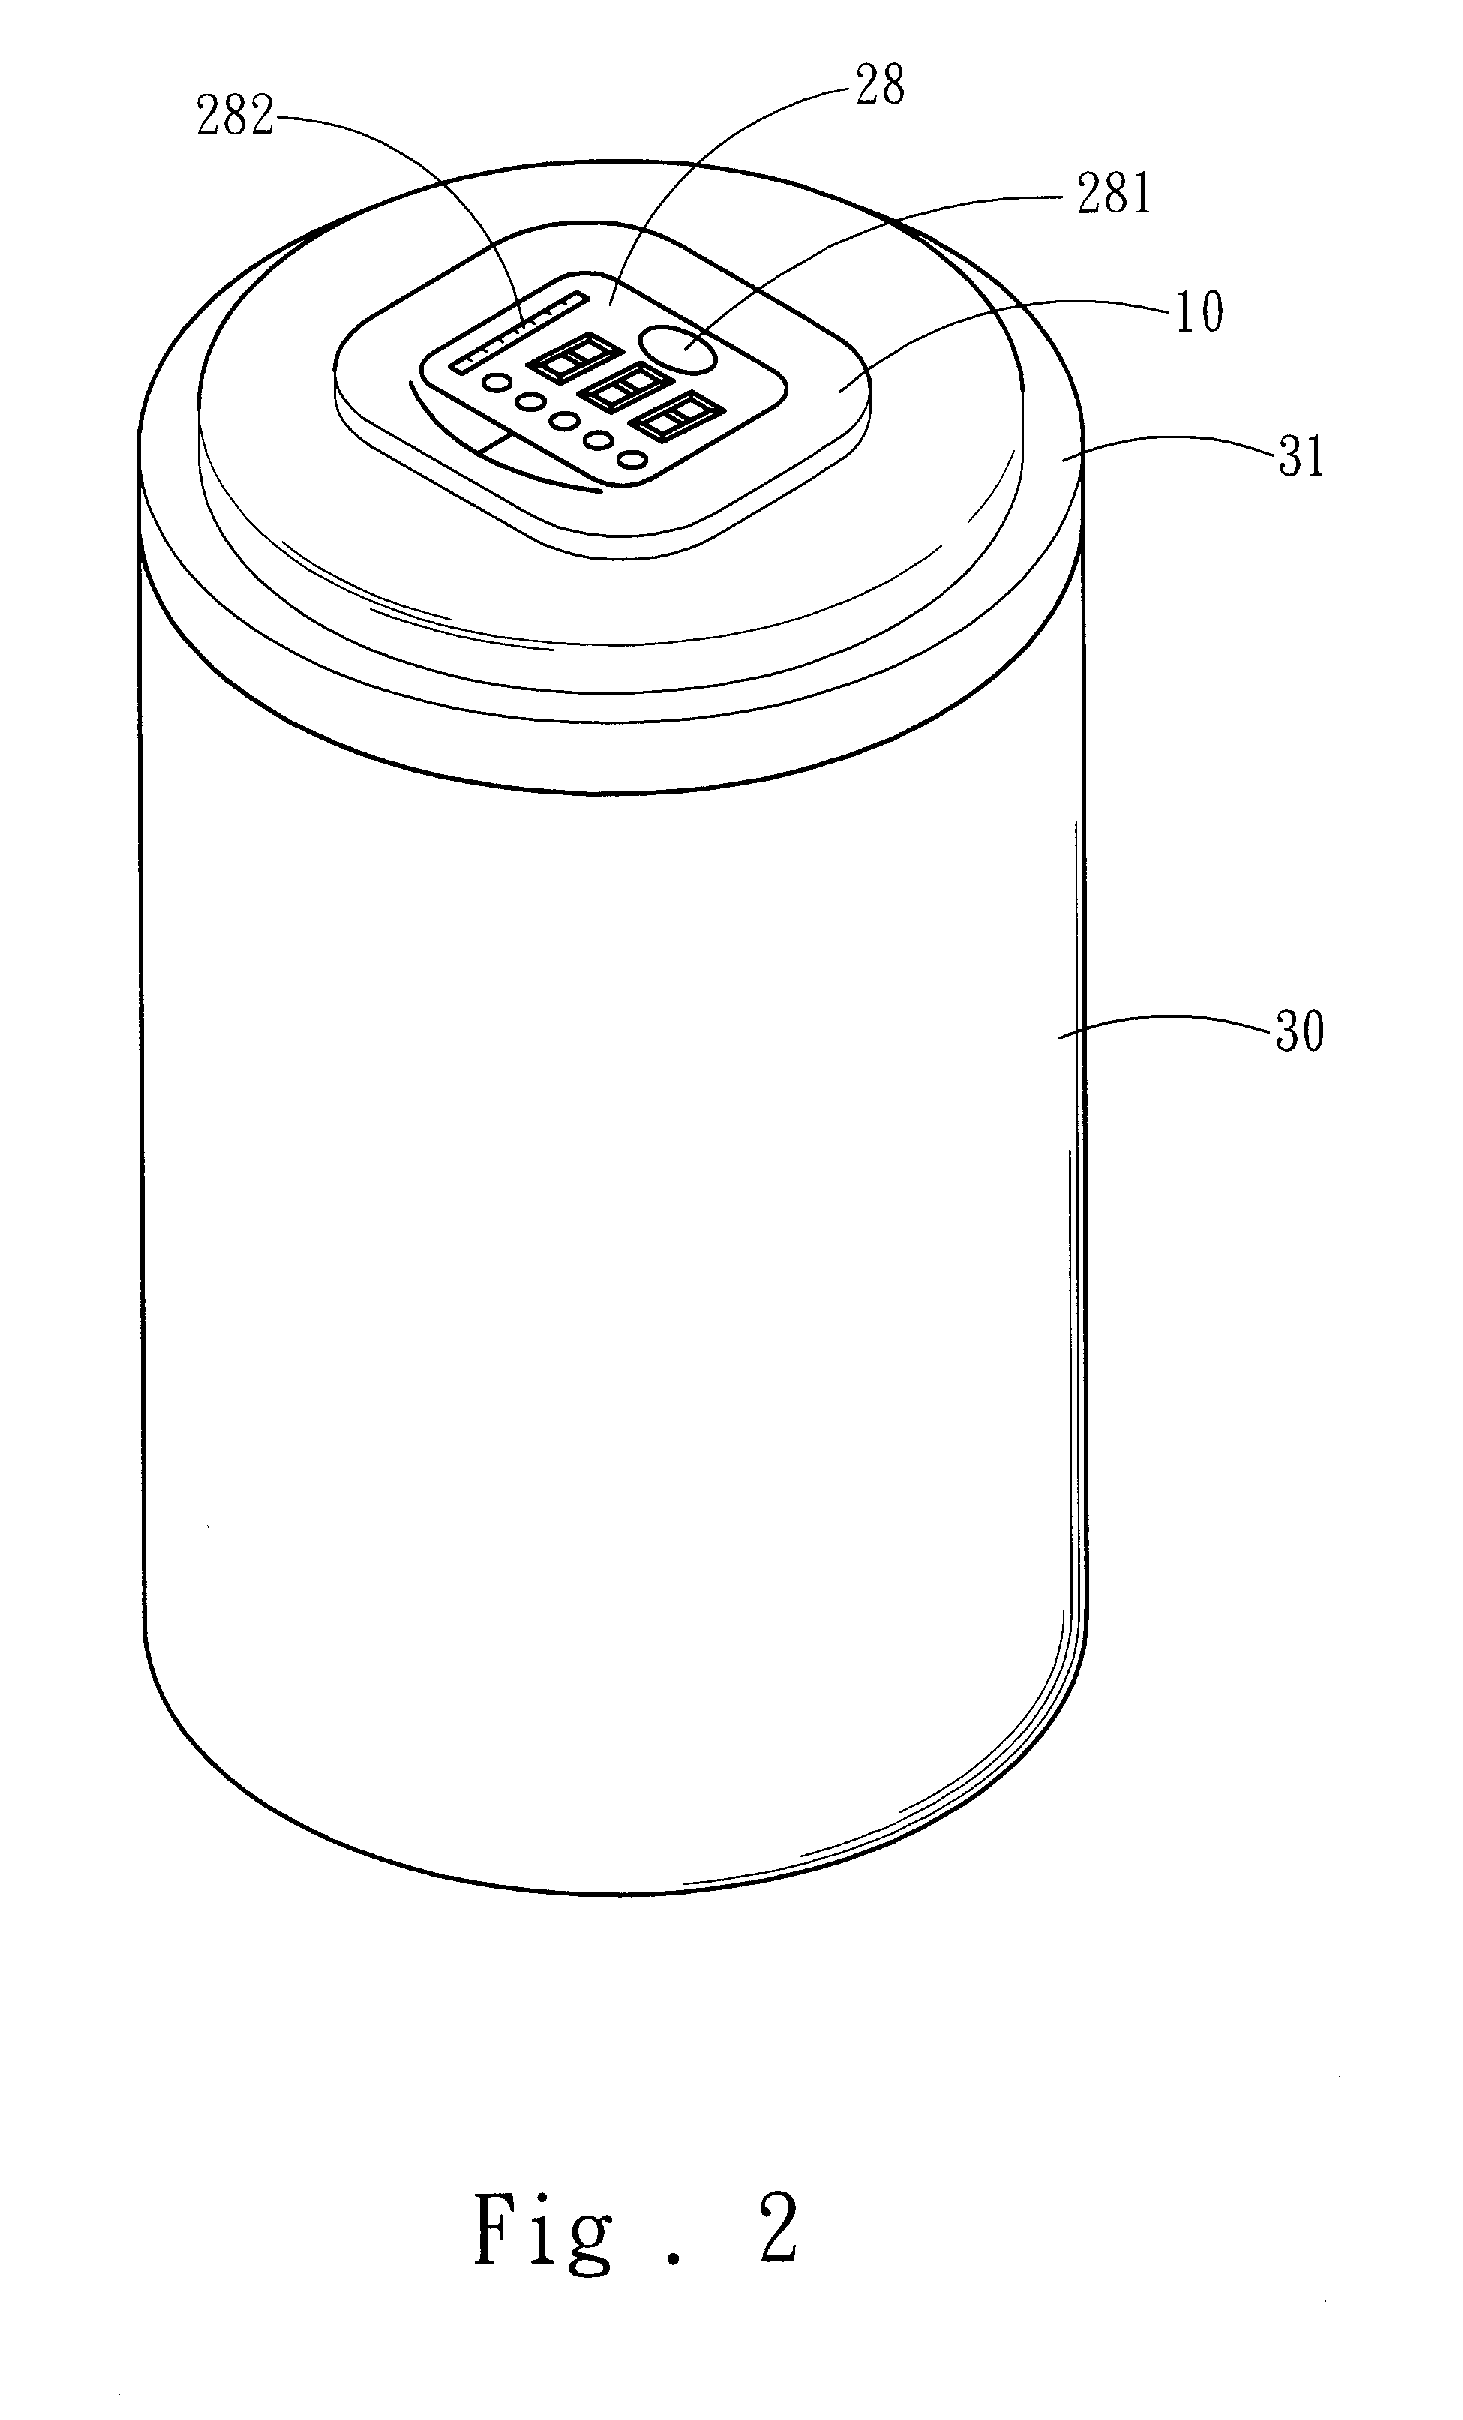 Method of active remiding water drinking